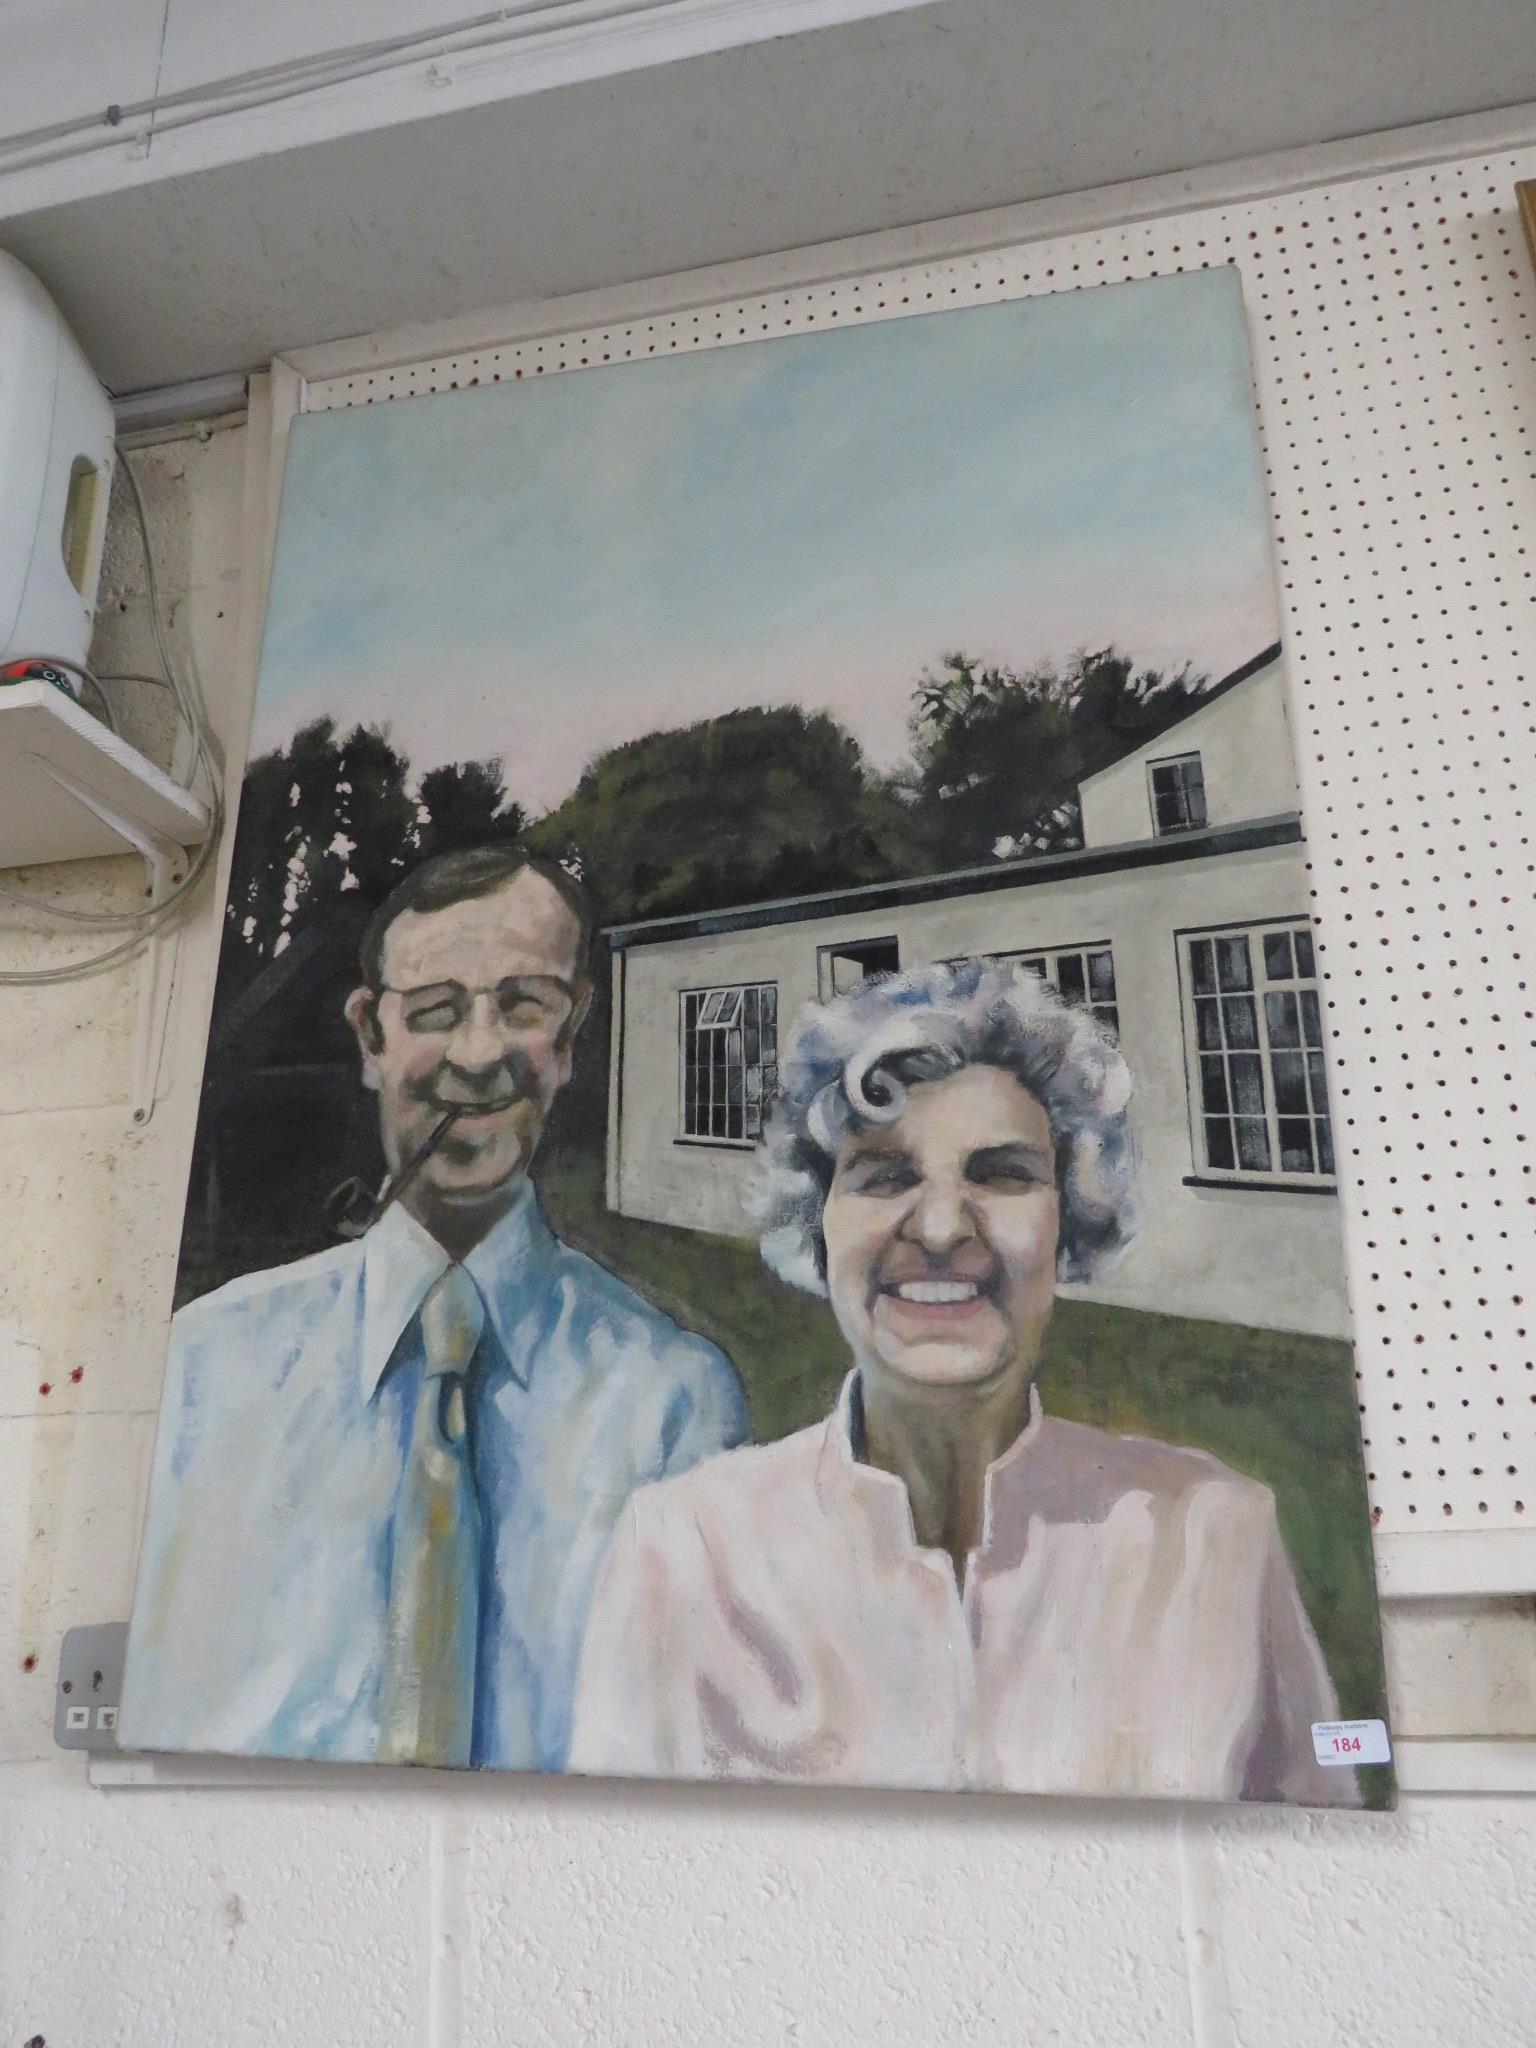 LARGE FRAME LESS CANVAS PAINTING OF LADY AND GENT IN THE STYLE OF AMERICAN GOTHIC.